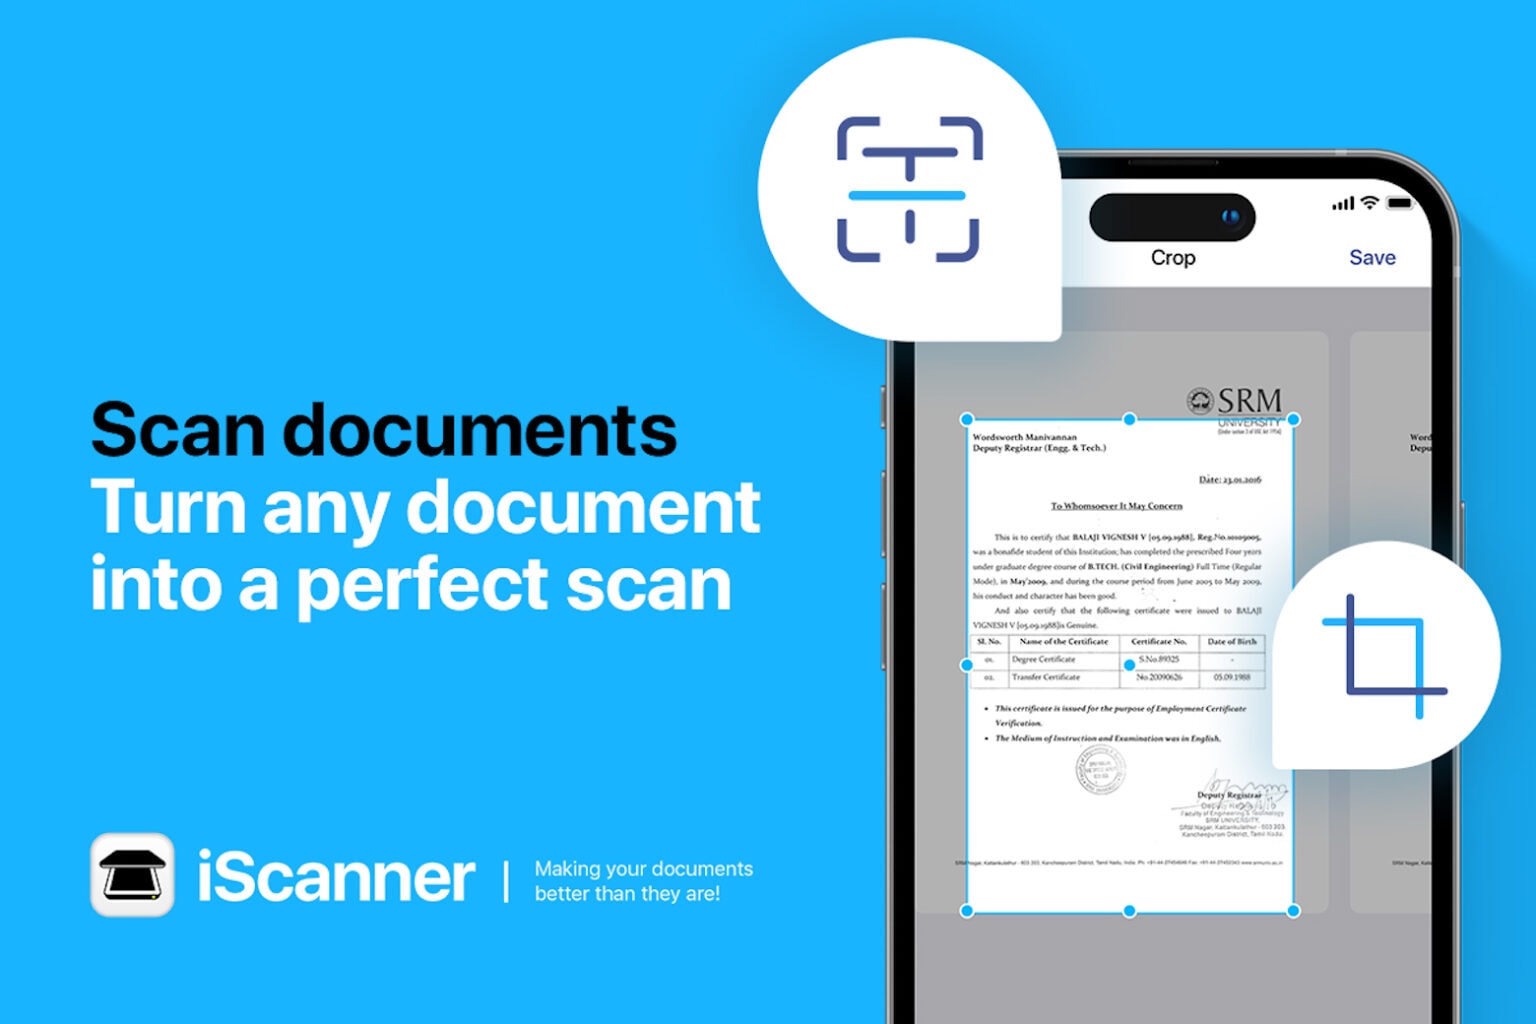 Save time and space with this on-the-go scanning app for a low price.